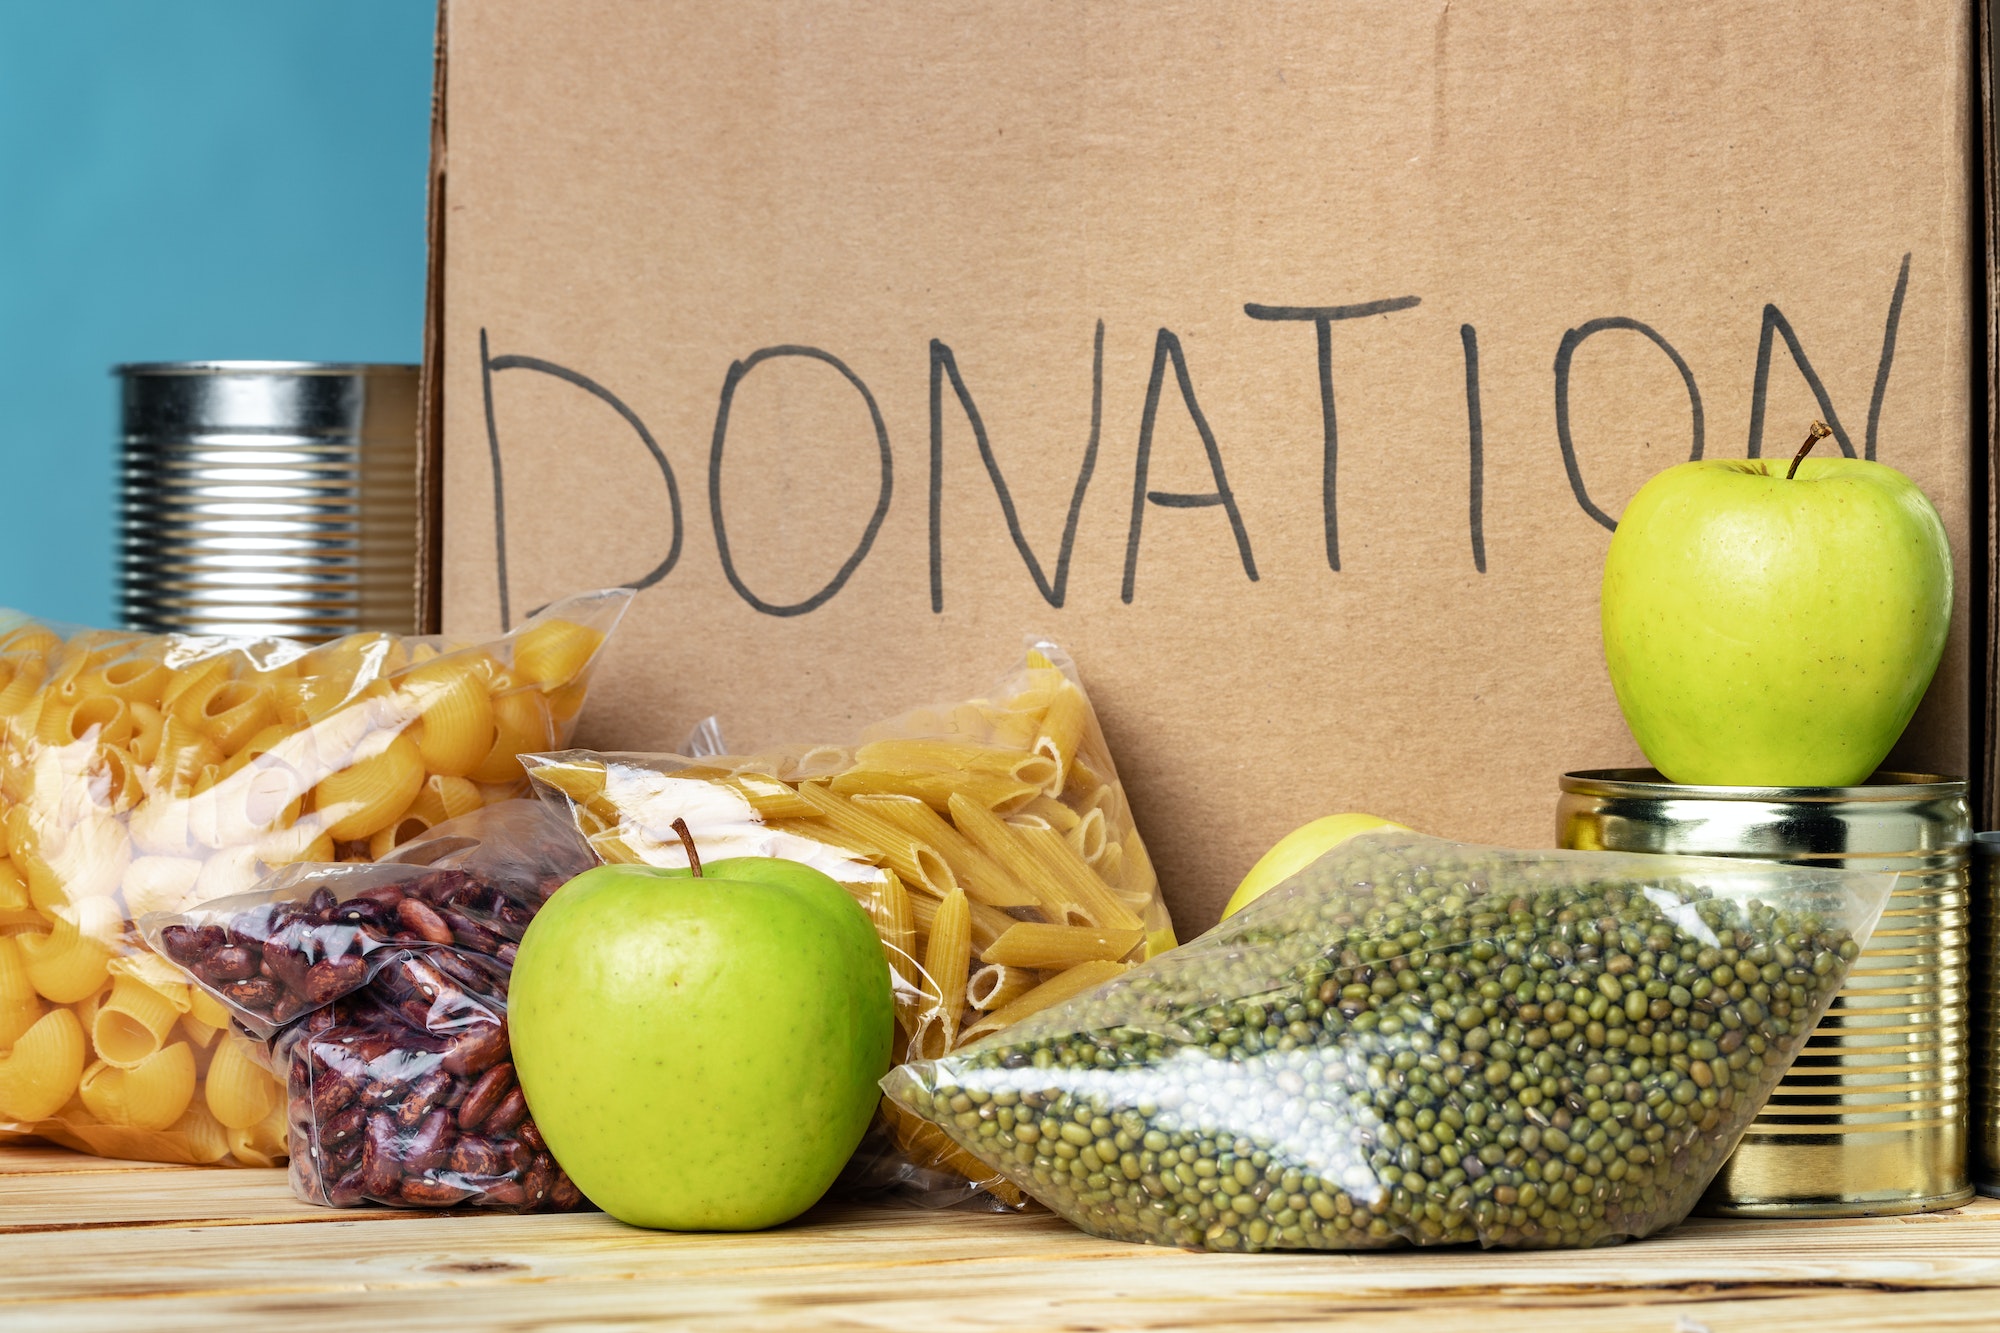 Food donations on the table. Text Donation.